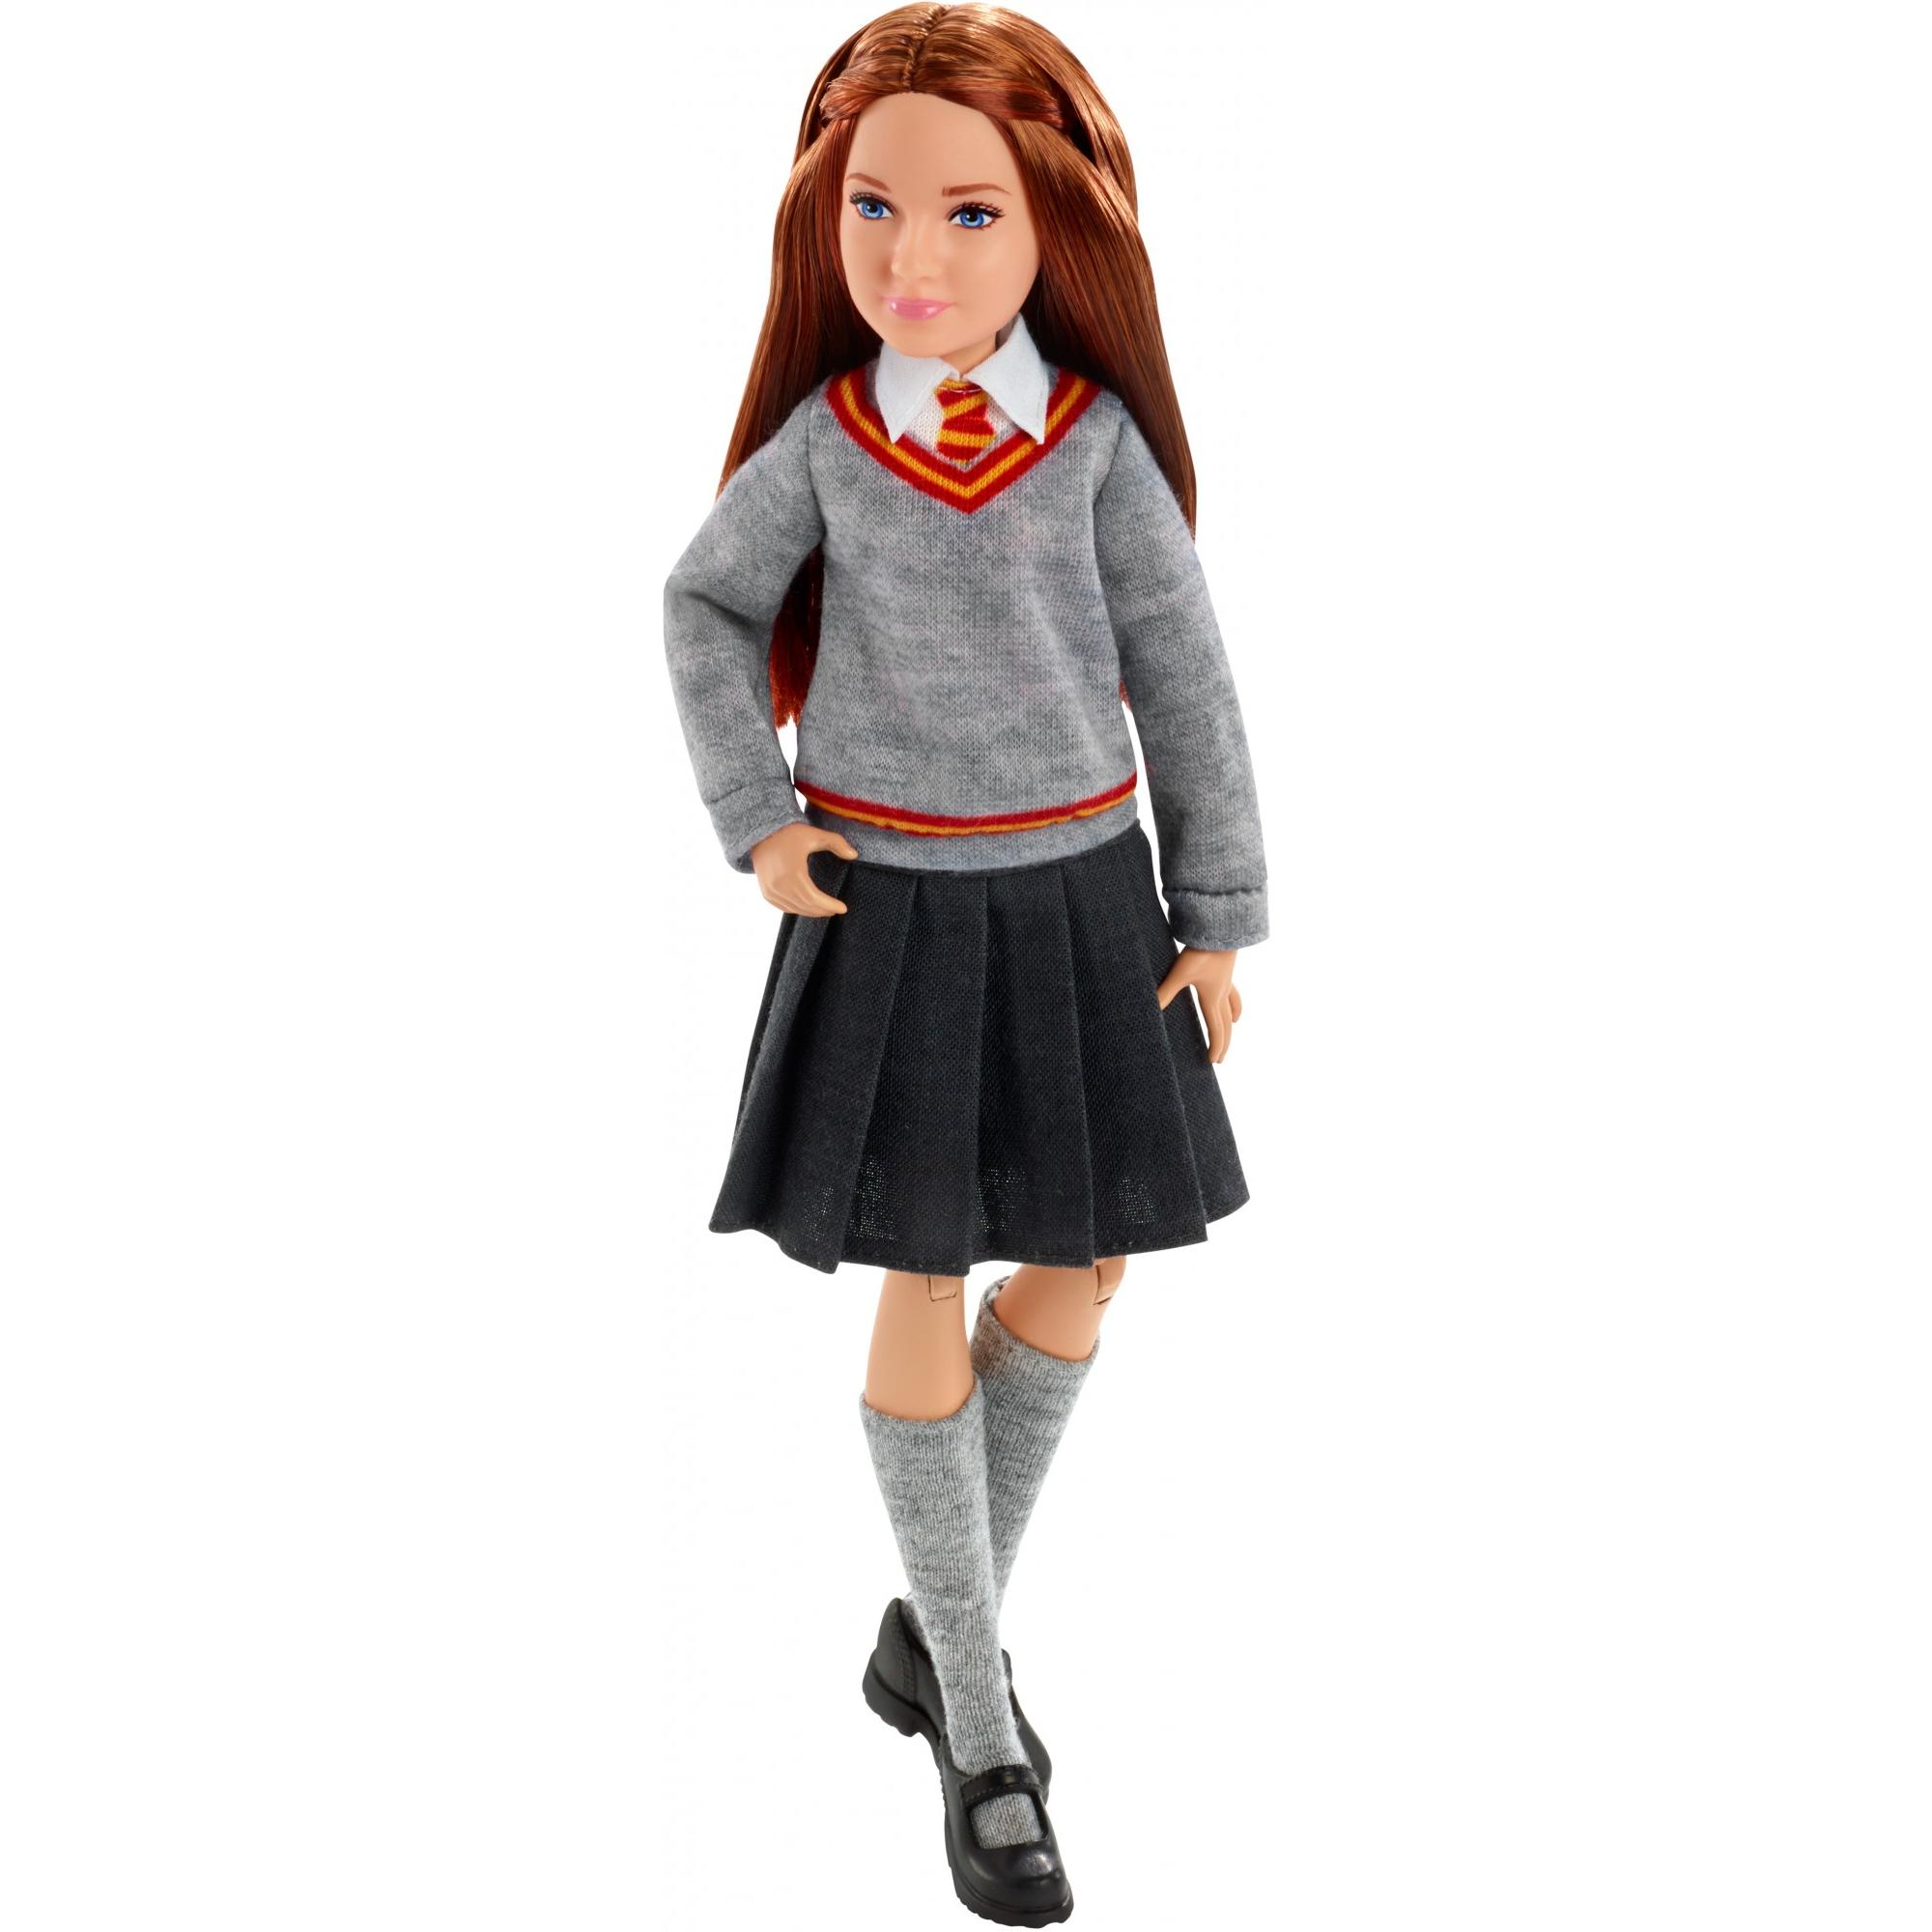 Harry Potter Ginny Weasley Film-Inspired Collector Doll Playset - image 4 of 7